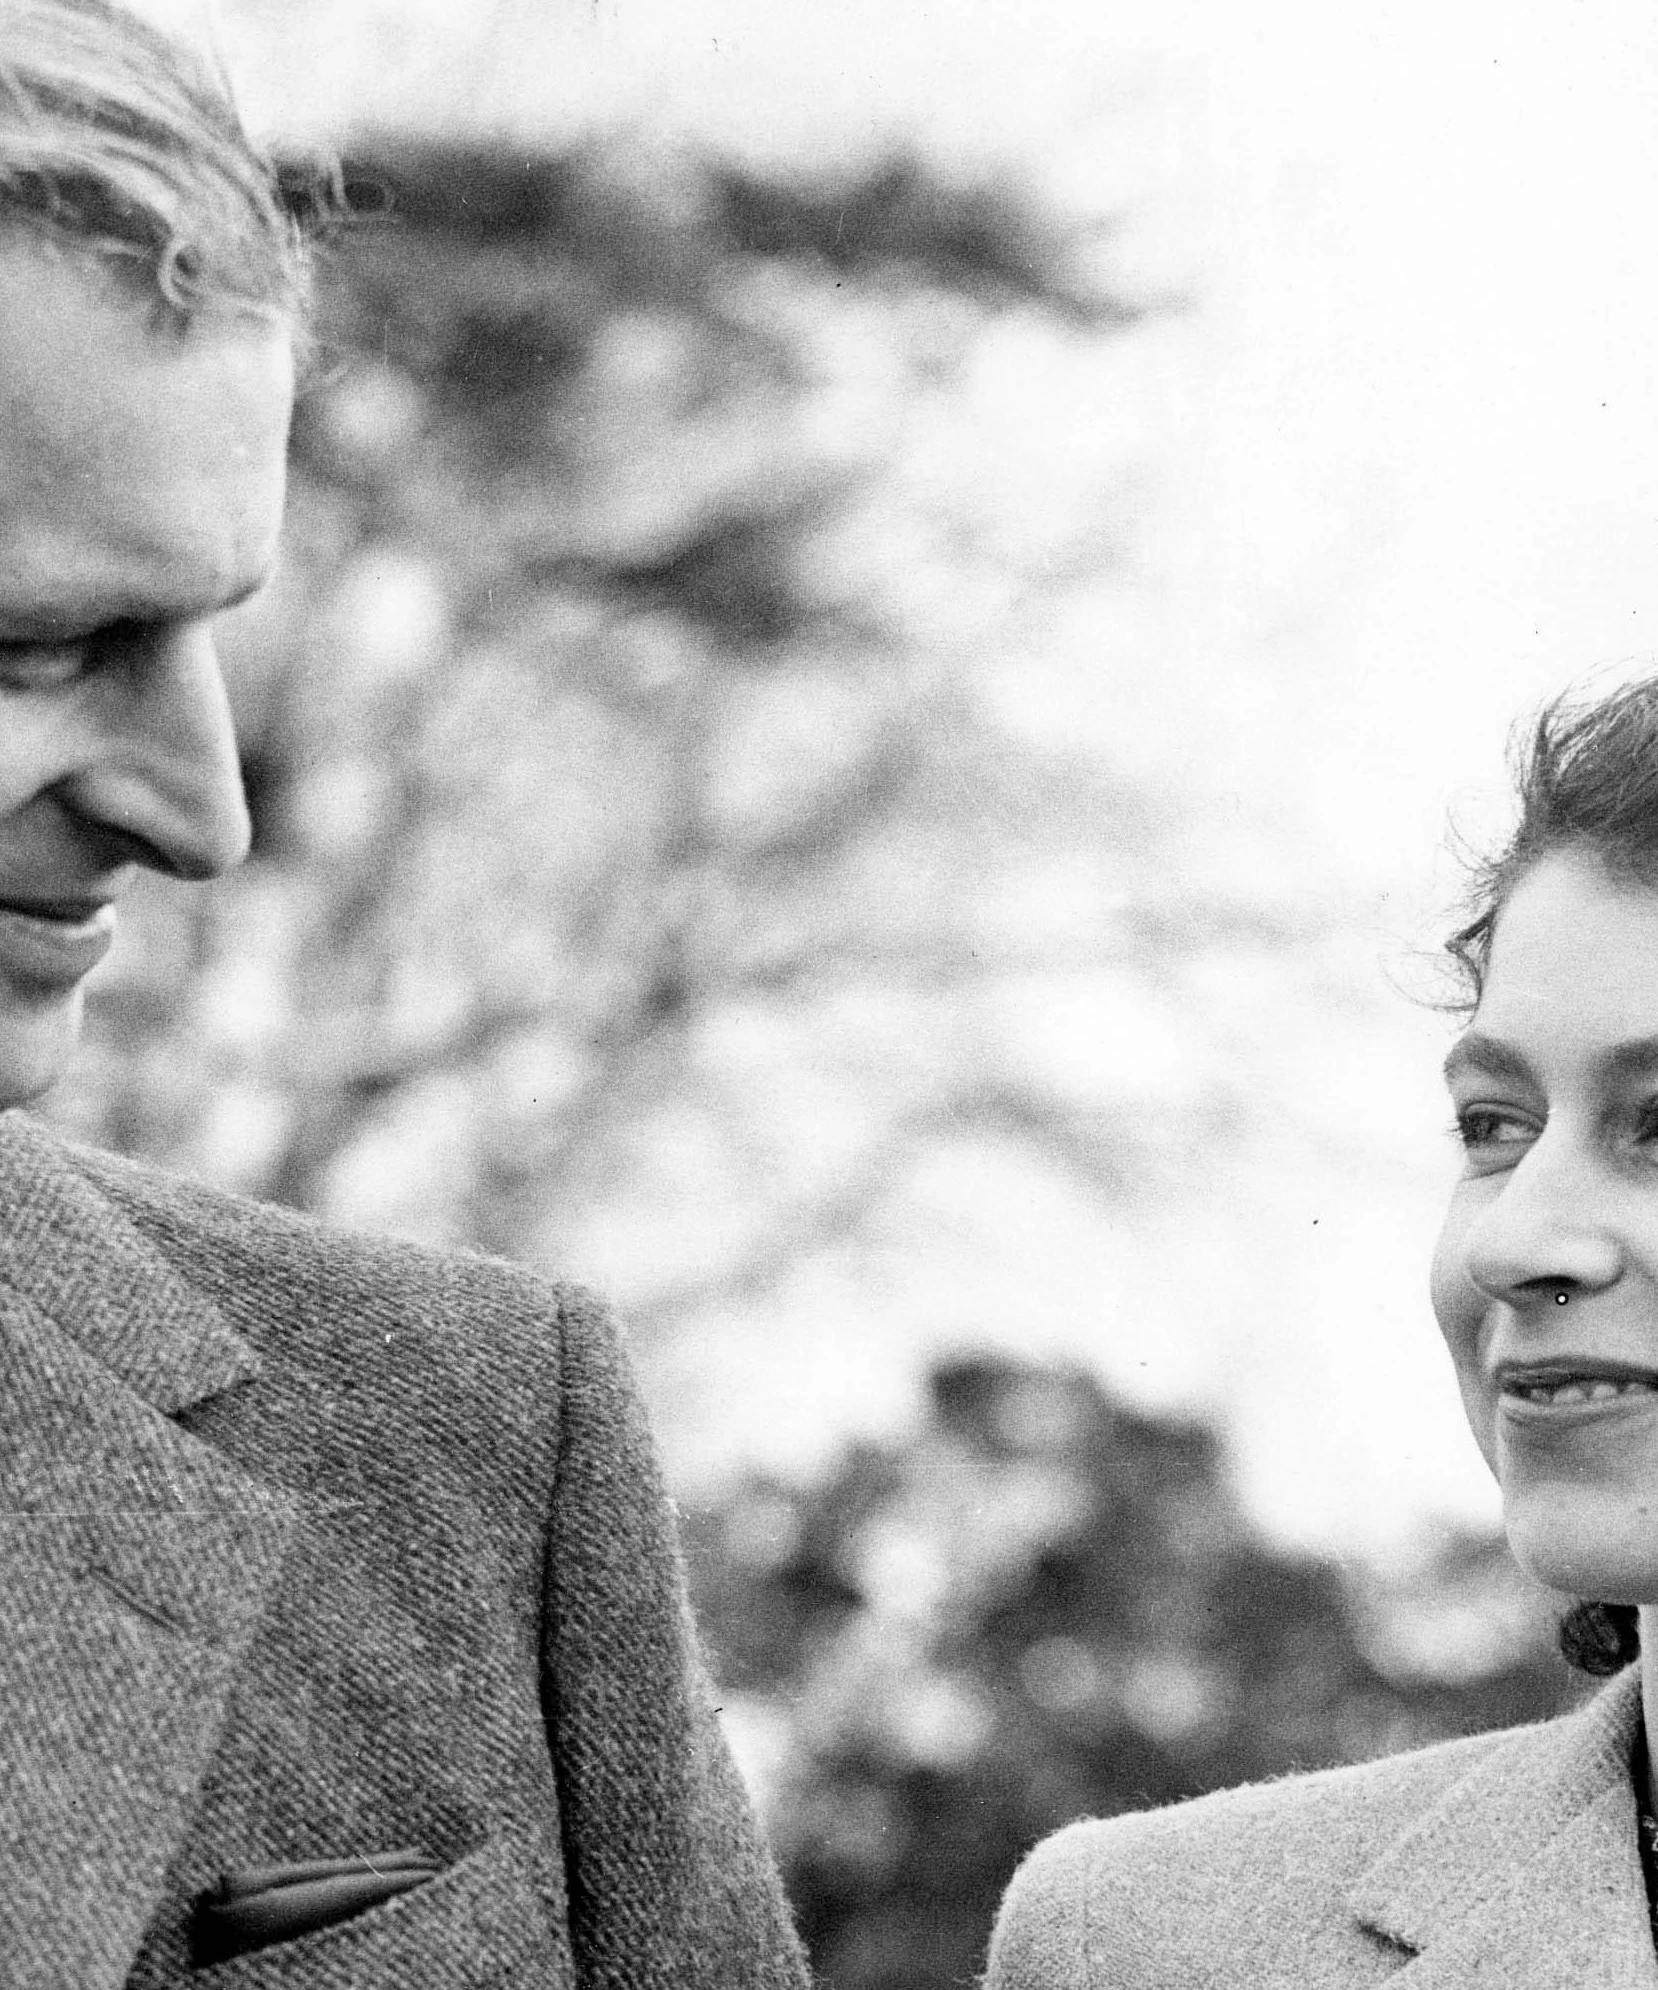 Prince Philip’s Romance With Queen Elizabeth Was One For The Ages